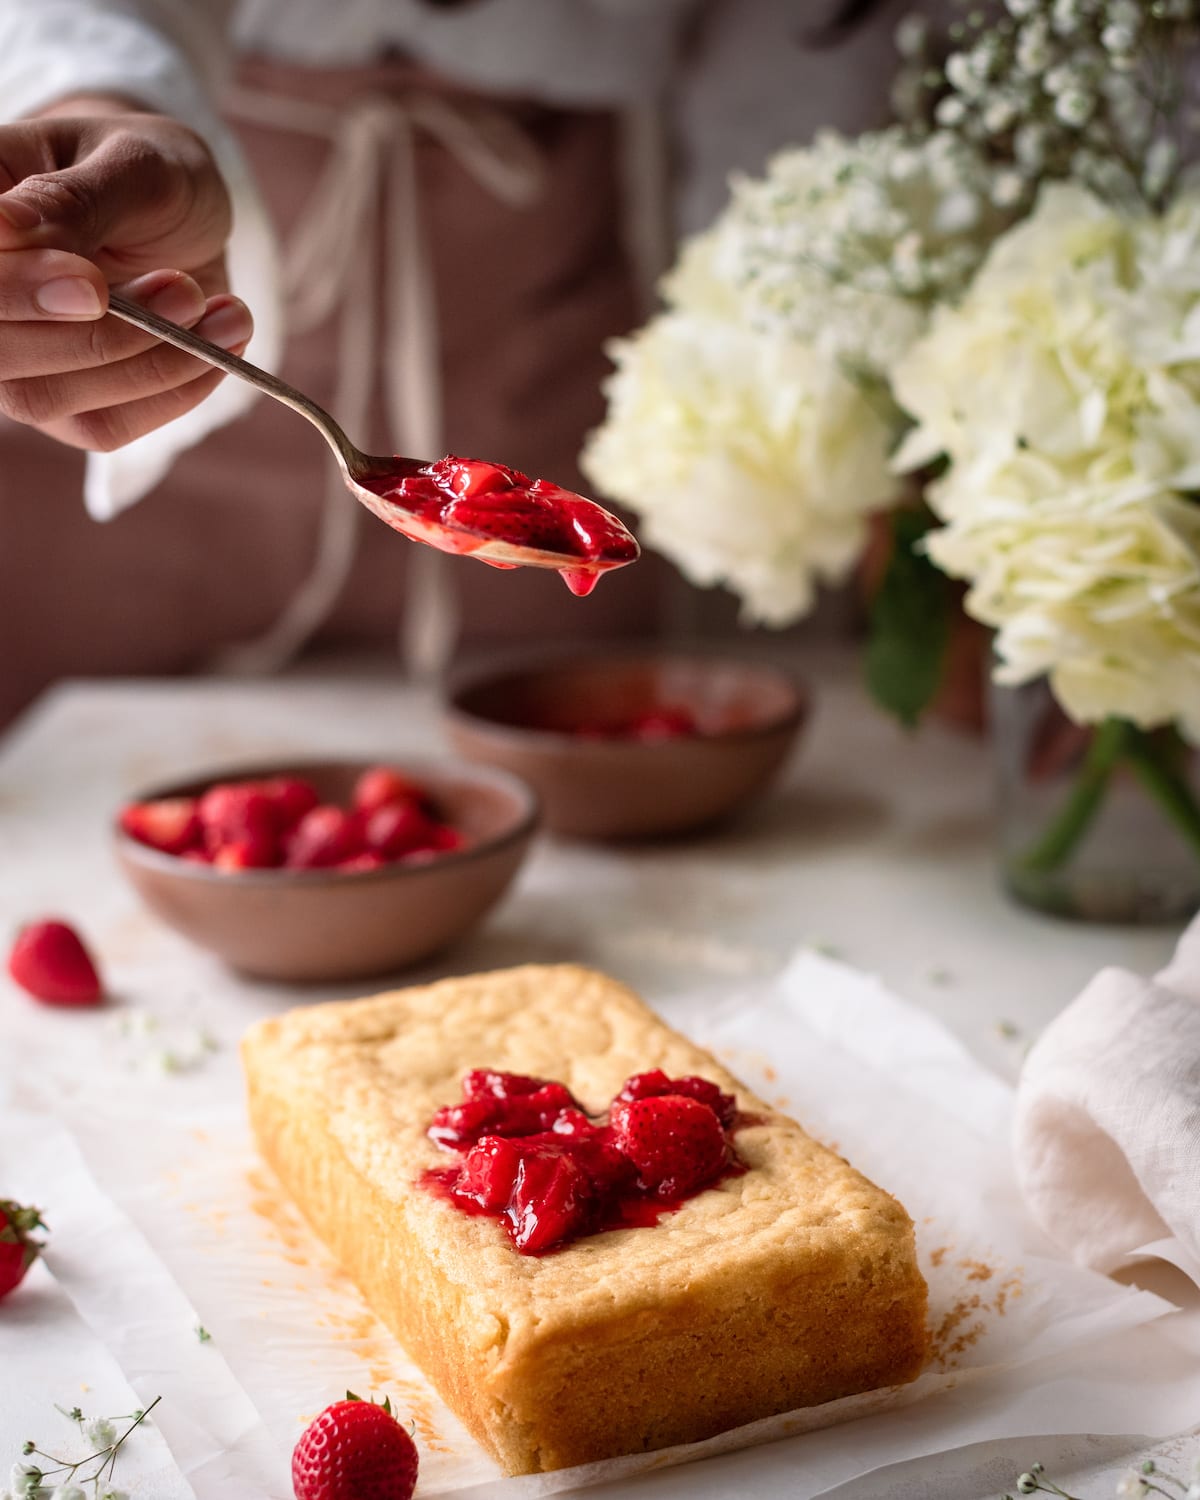 woman spooning strawberry sauce onto lemon olive oil cake in romantic food photography scene